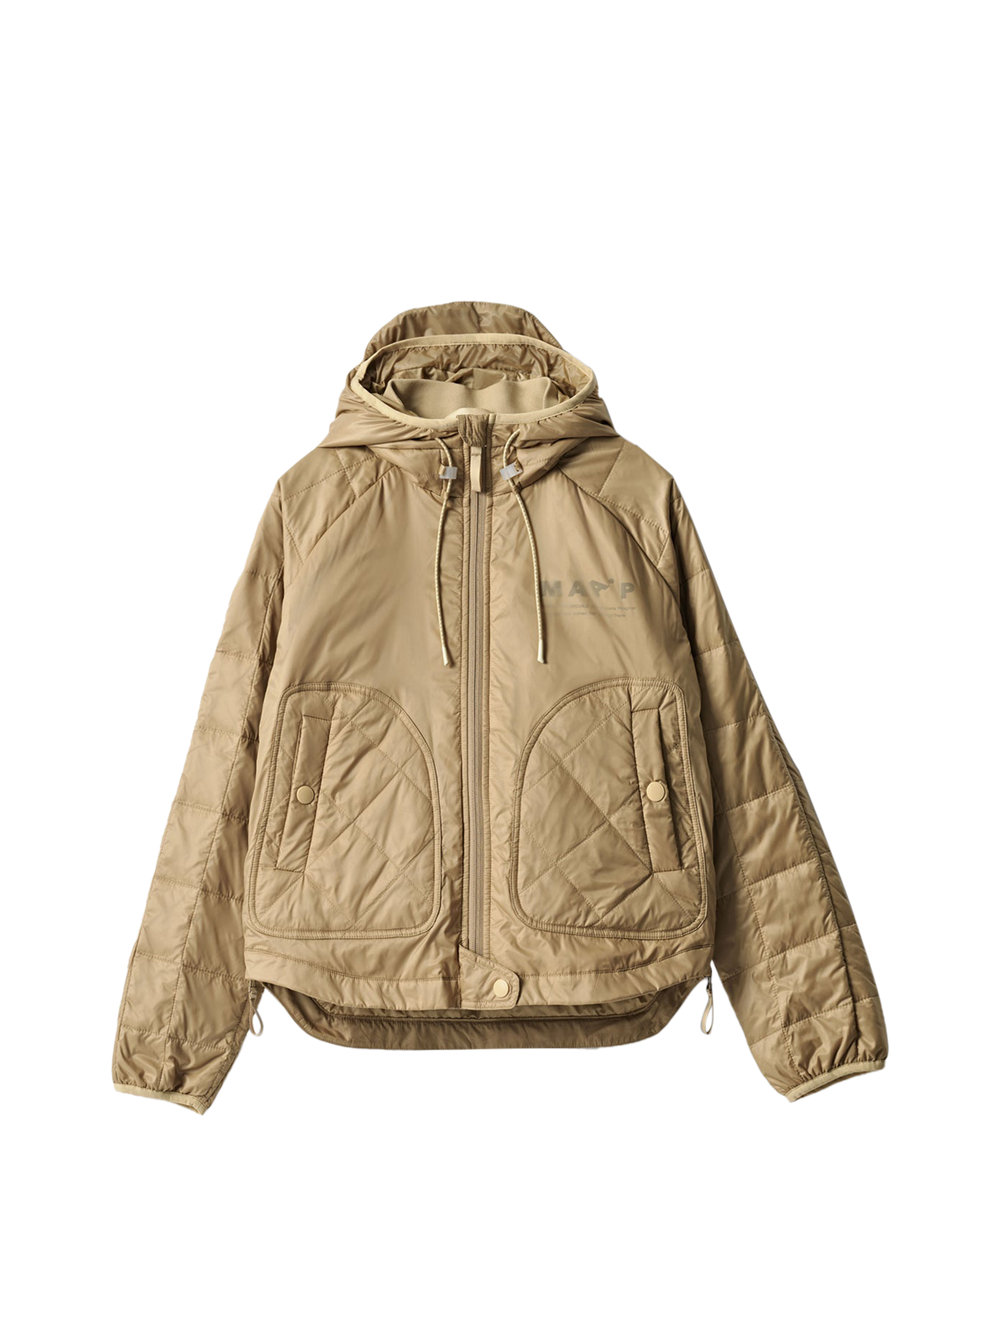 Product Image for The Arrivals + MAAP Alt_Road Women's Haelo Packable Jacket